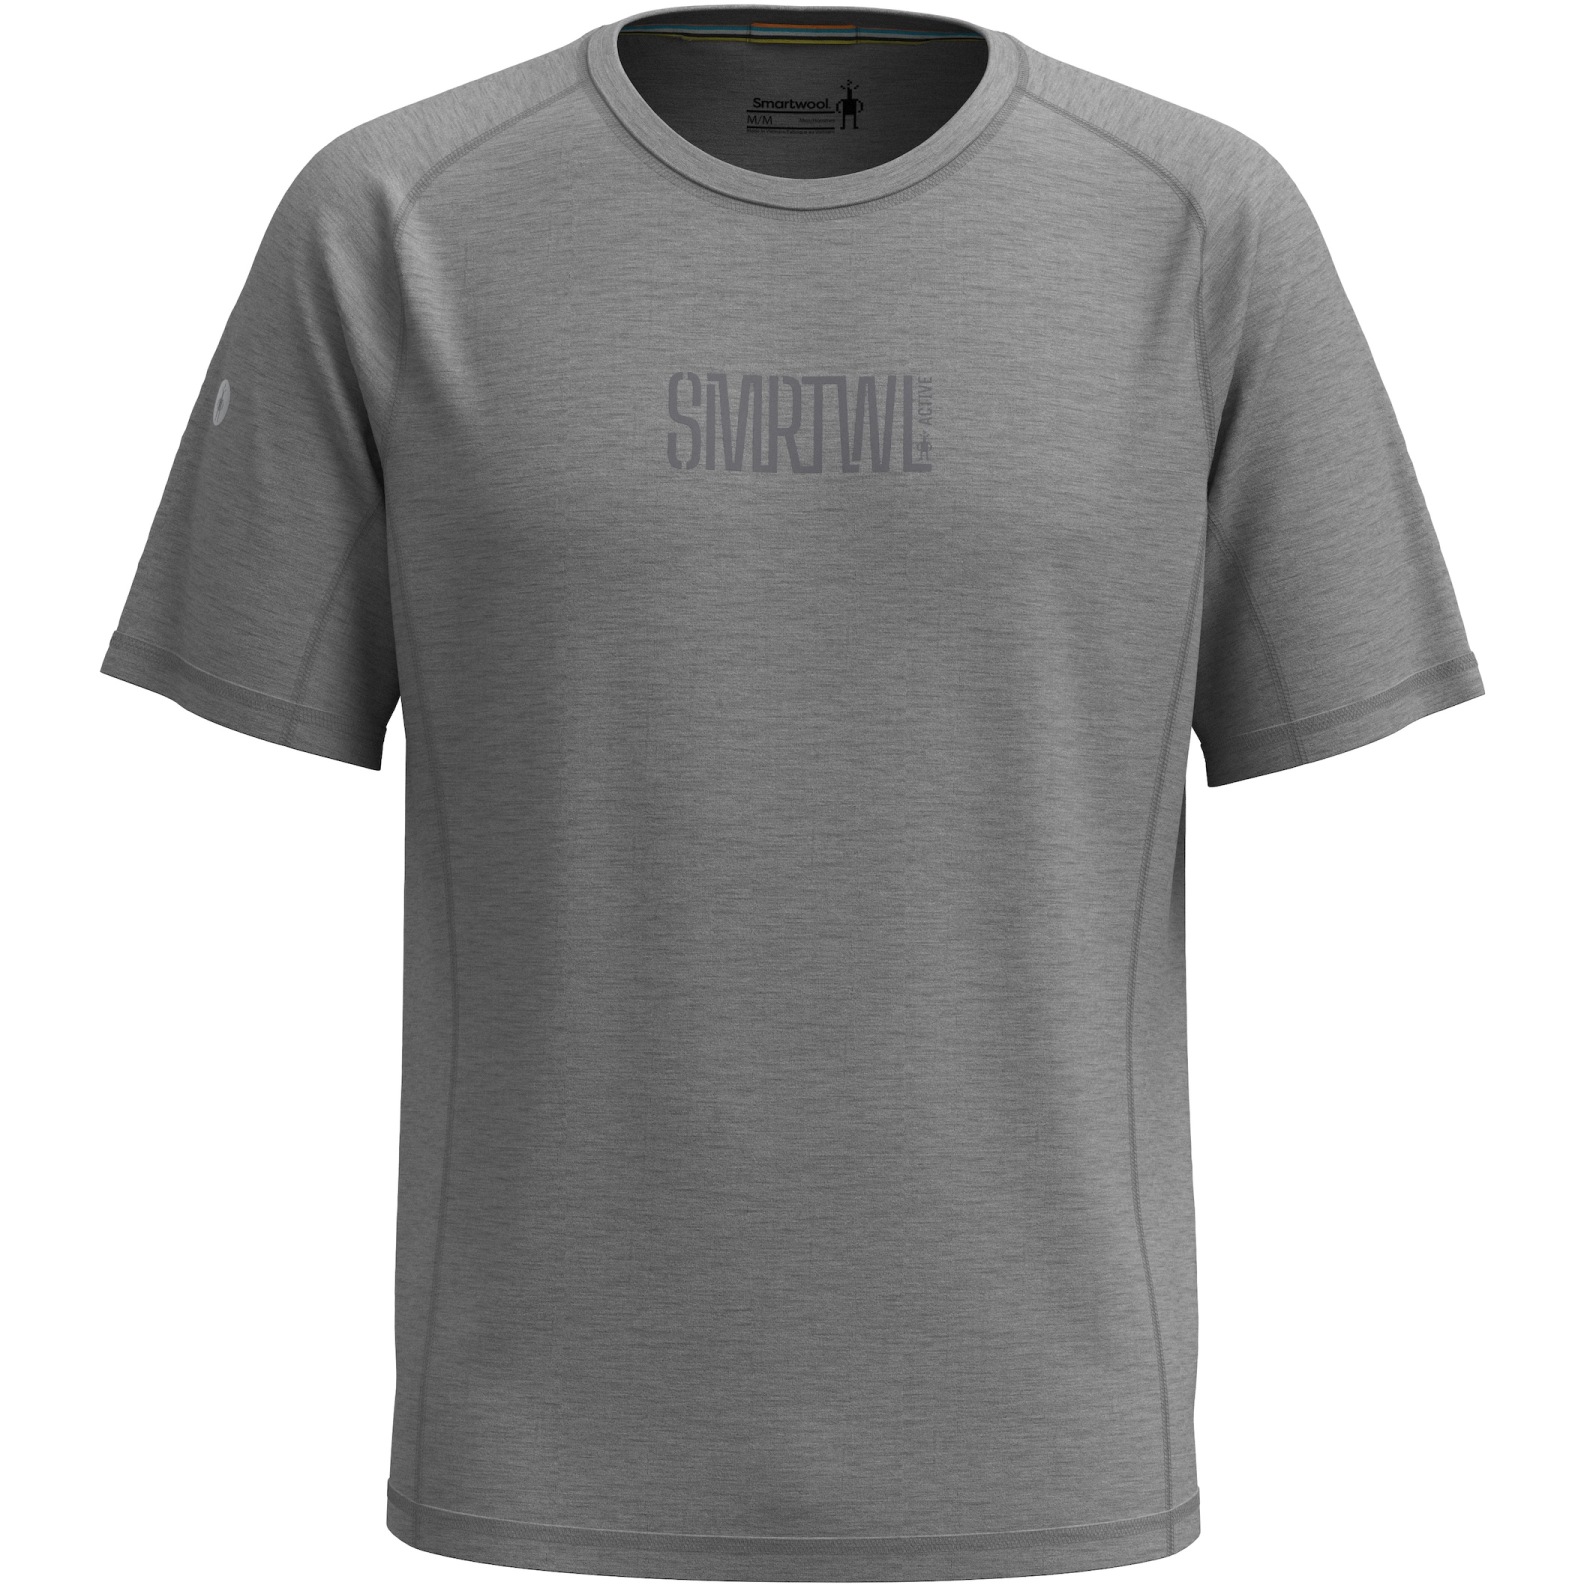 Picture of SmartWool Active Ultralite Graphic Short Sleeve Tee Men - A85 light gray heather / medium gray heather